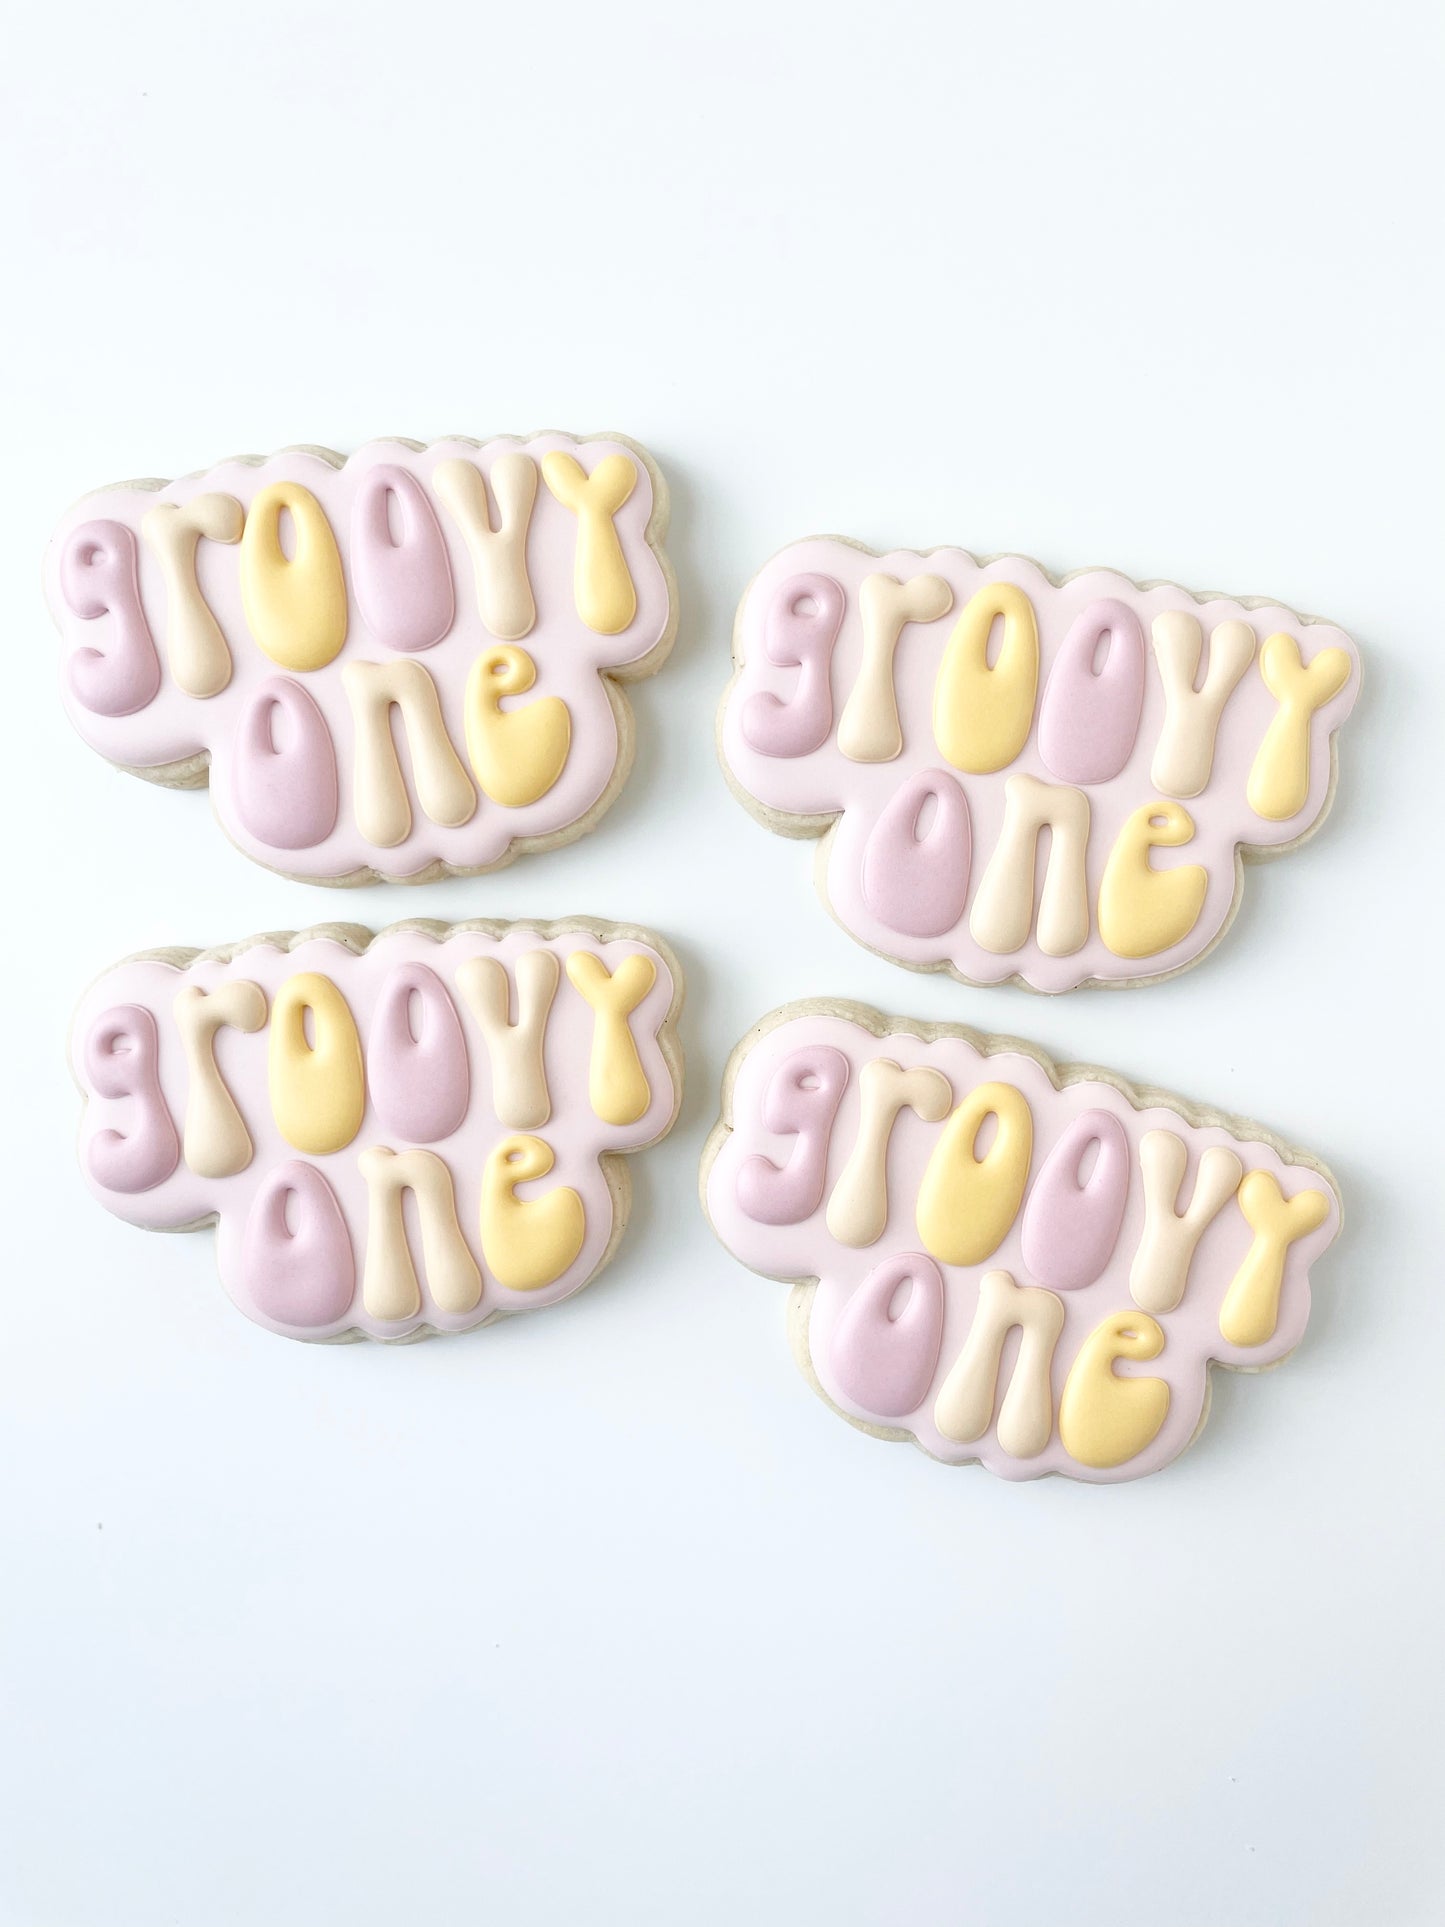 Groovy One or Two Groovy Cookie Cutters